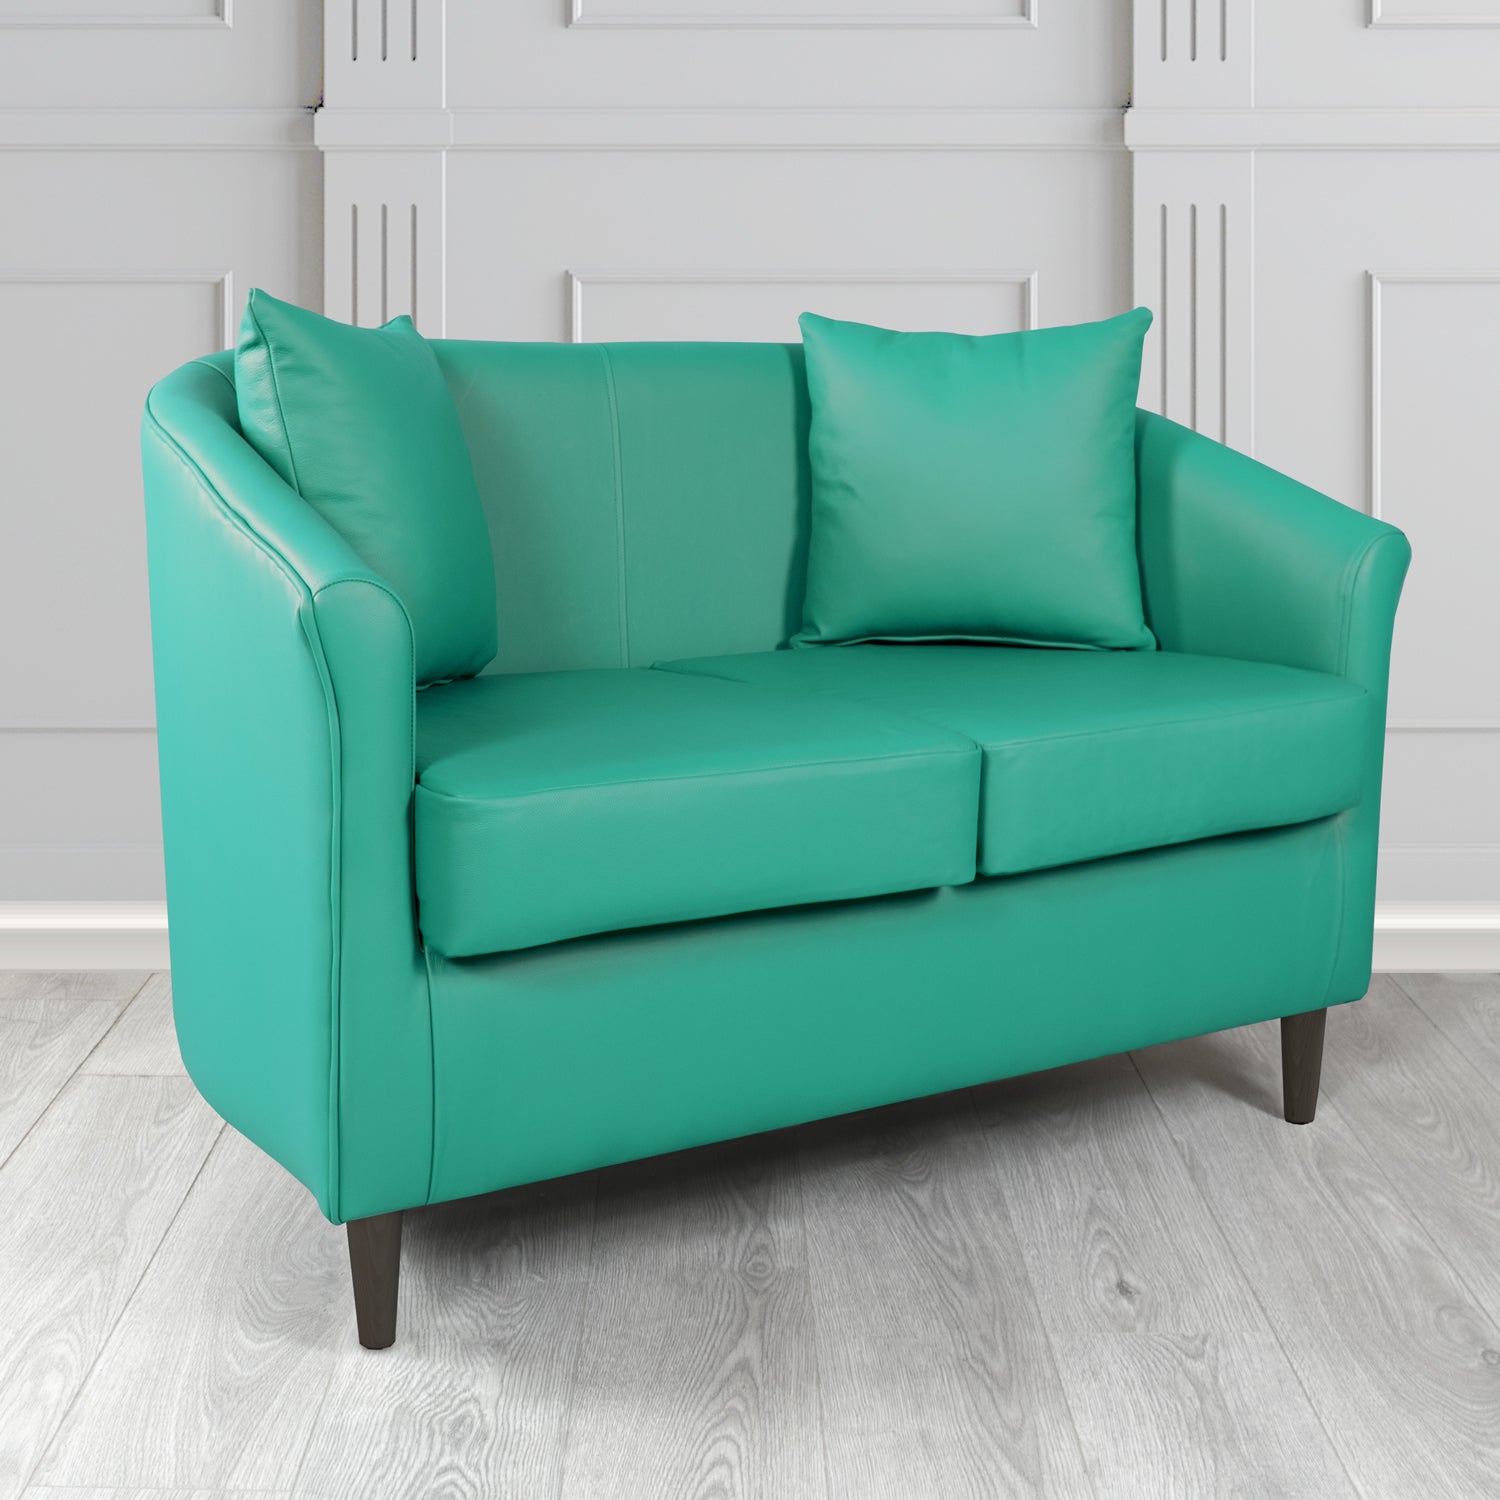 St Tropez Shelly Dark Teal Crib 5 Genuine Leather 2 Seater Tub Sofa with Scatter Cushions - The Tub Chair Shop